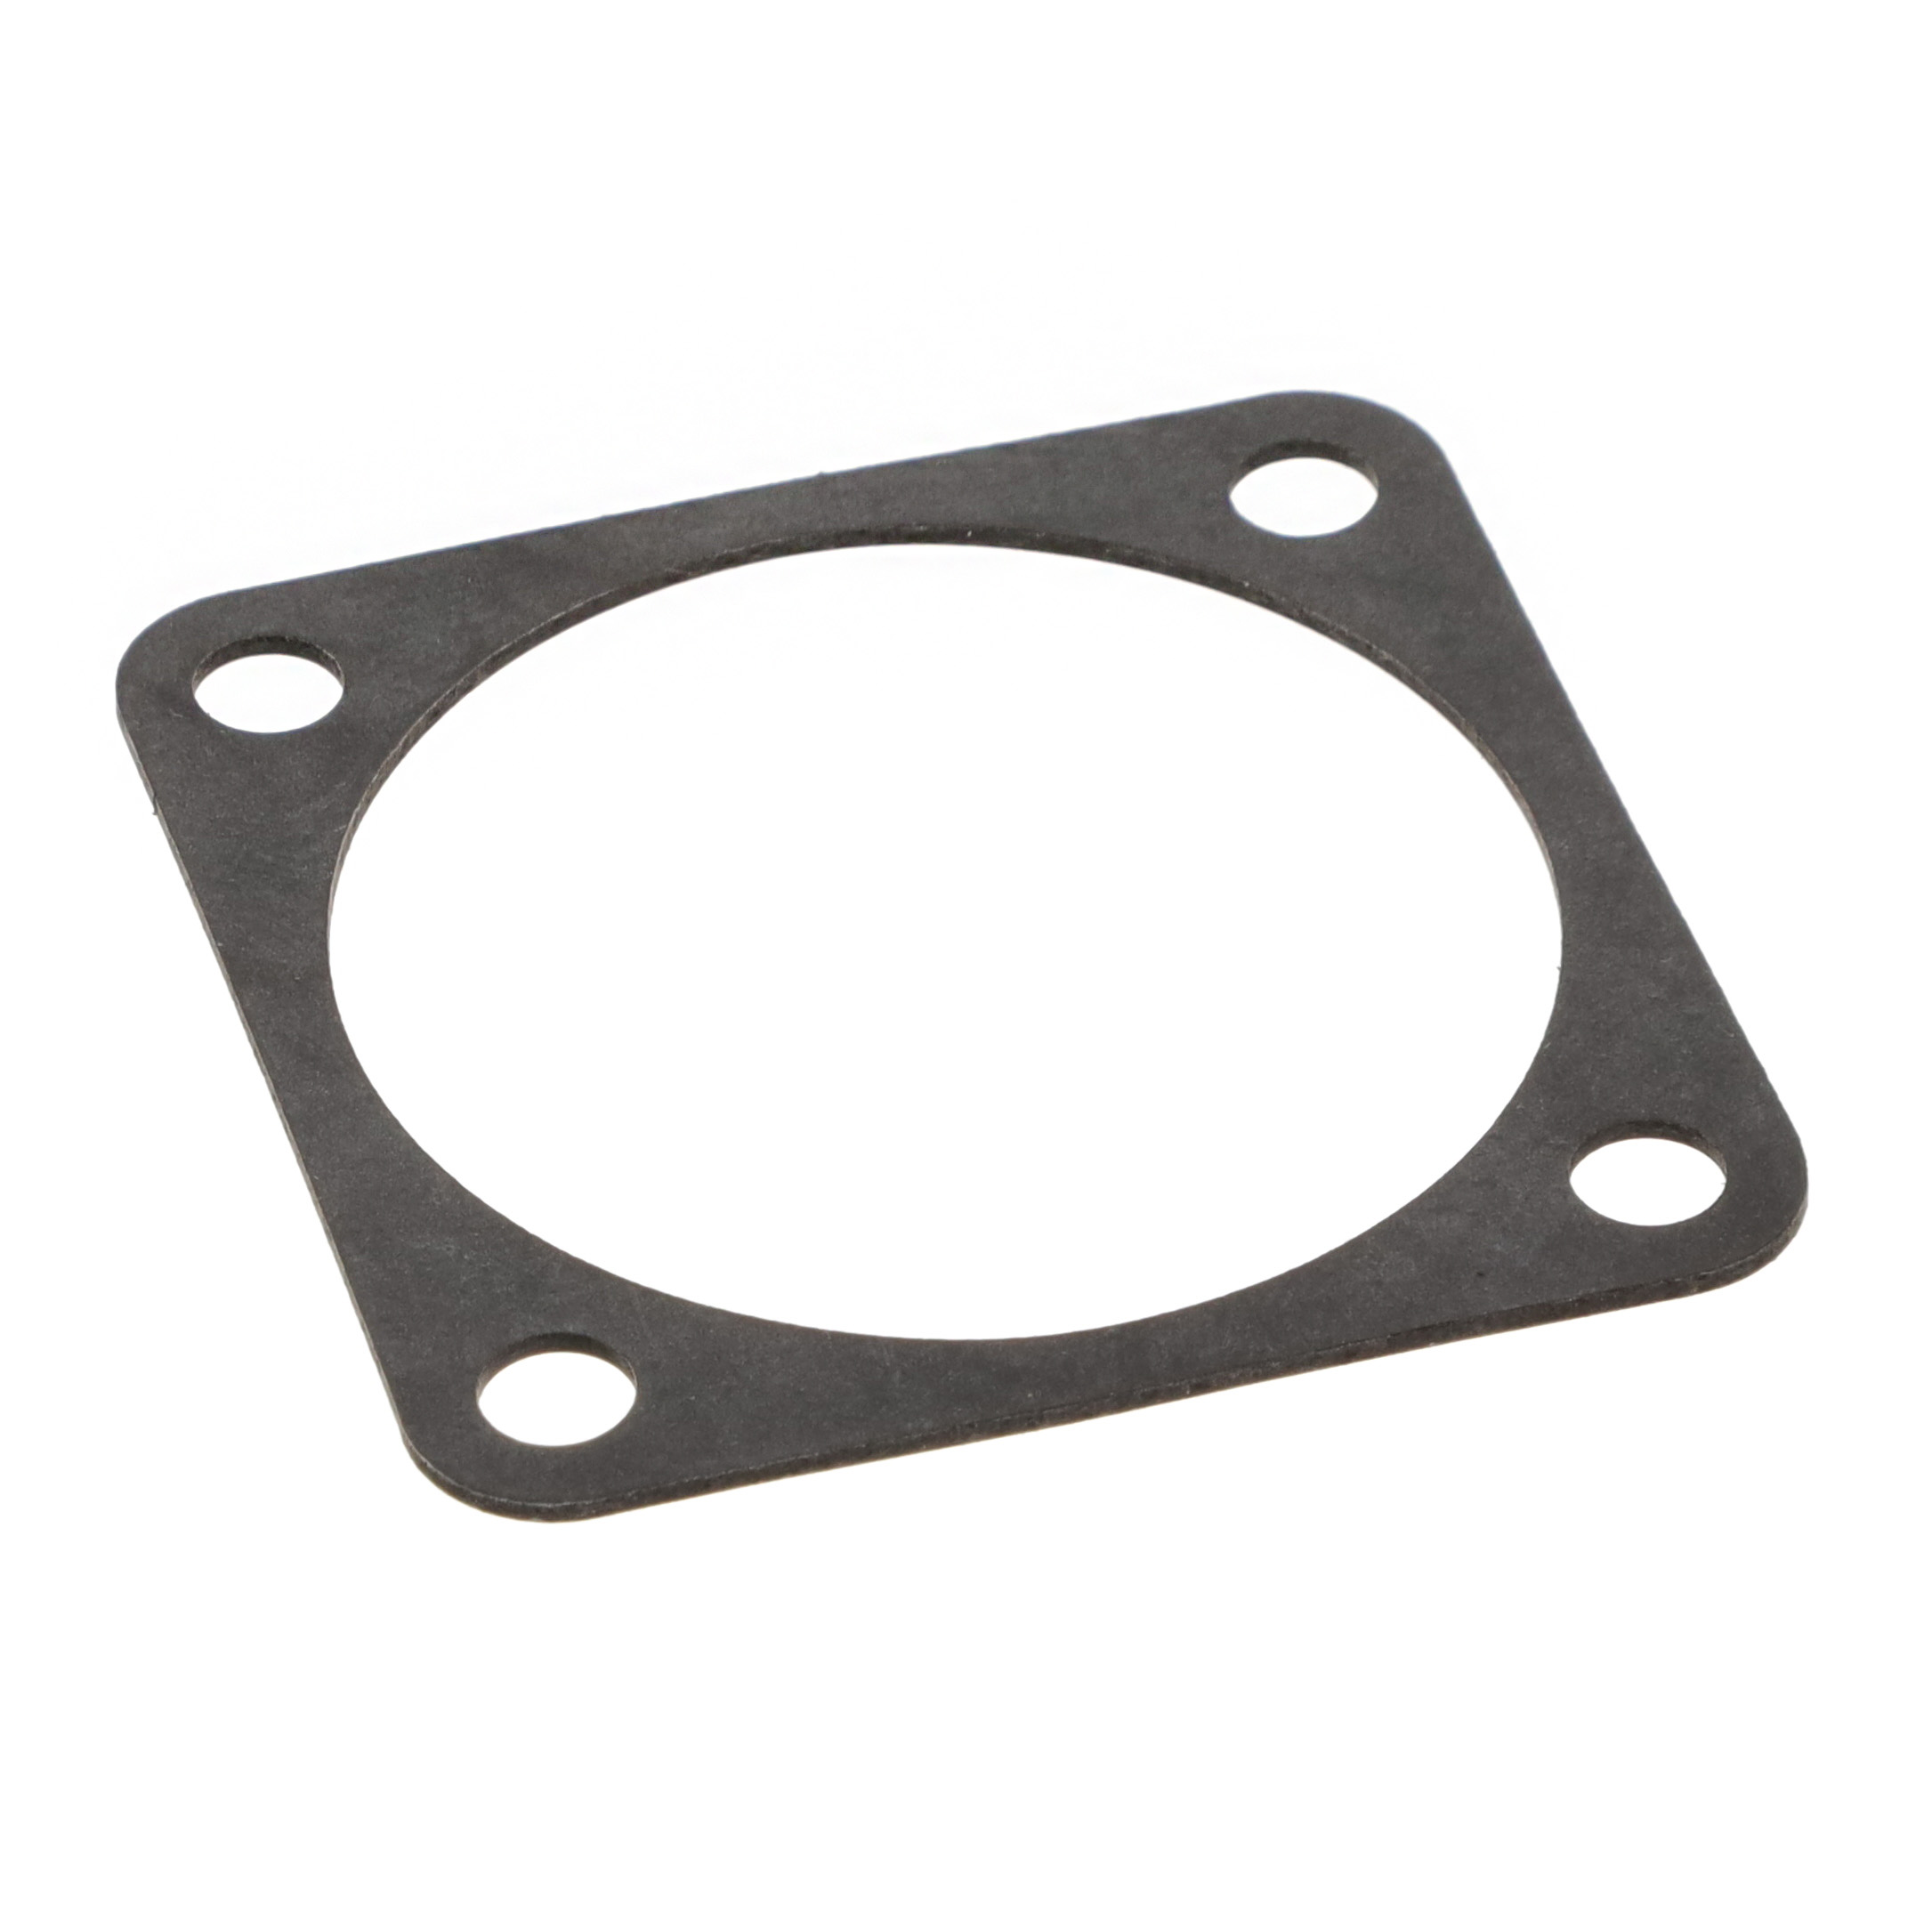 【075-8520-000】CONN GASKET FOR 28